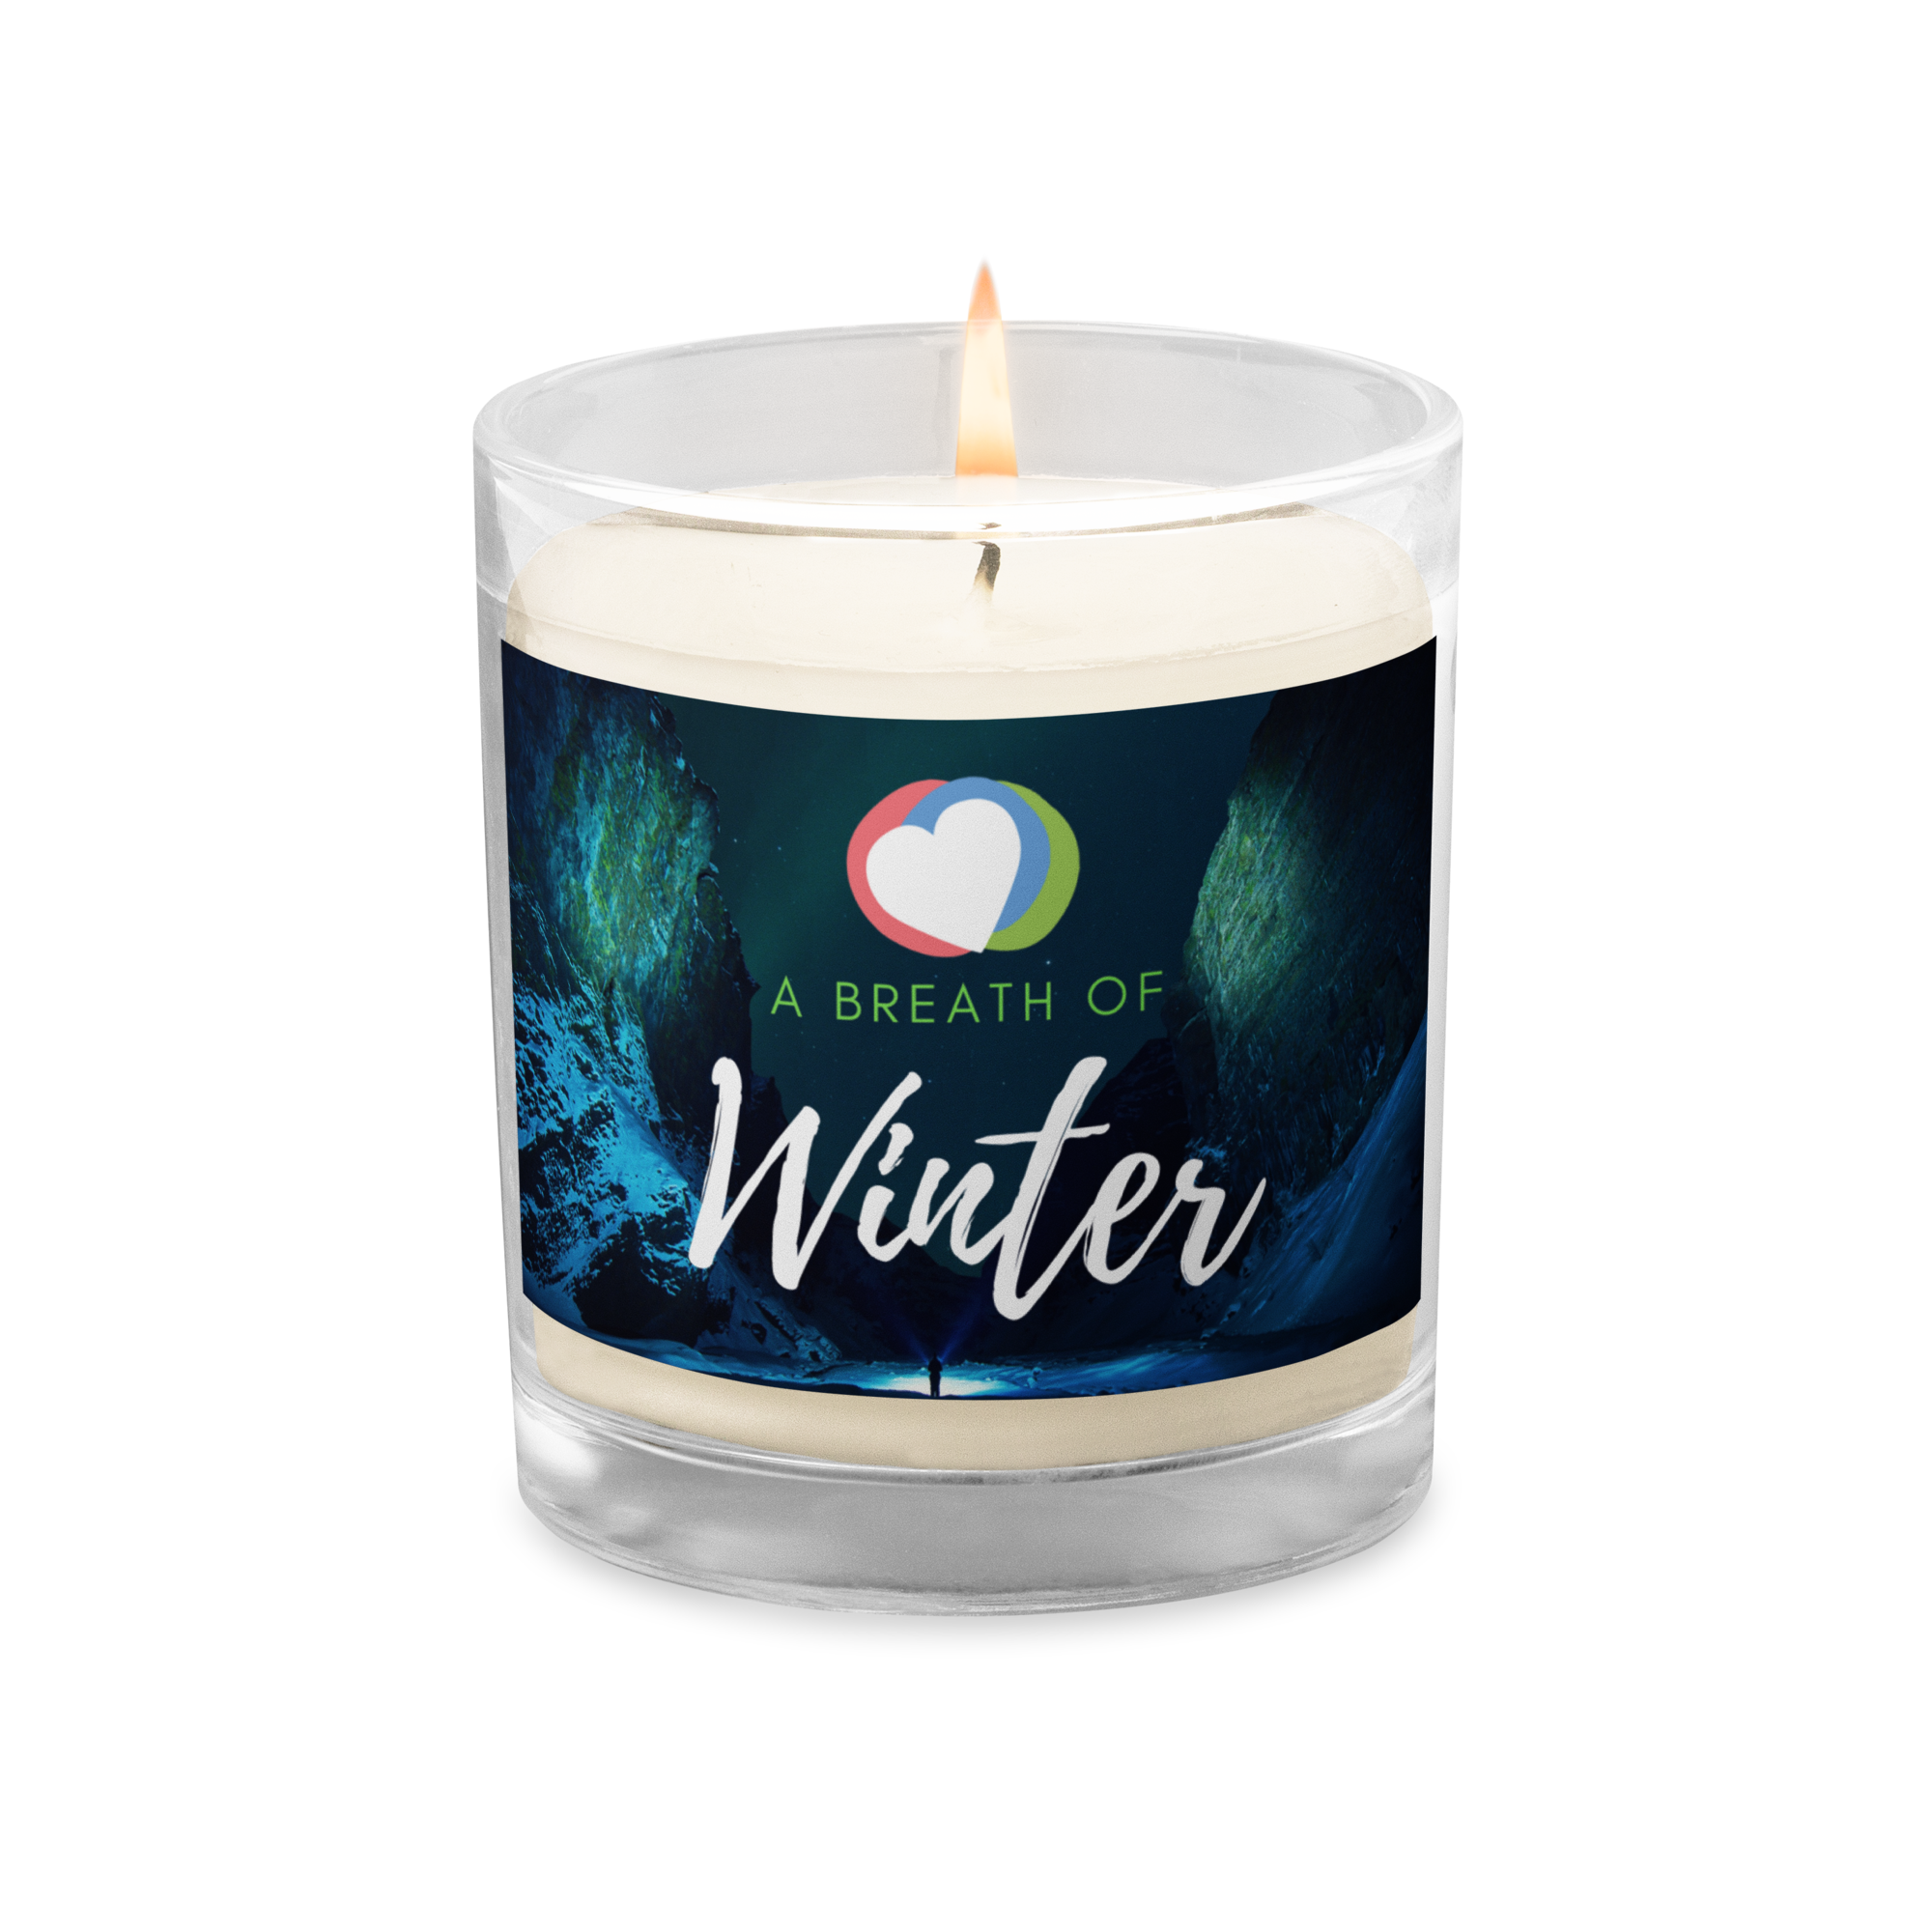 Jolly Christmas 2022 "A Breath of Winter" Glass Jar Soy Wax Candle